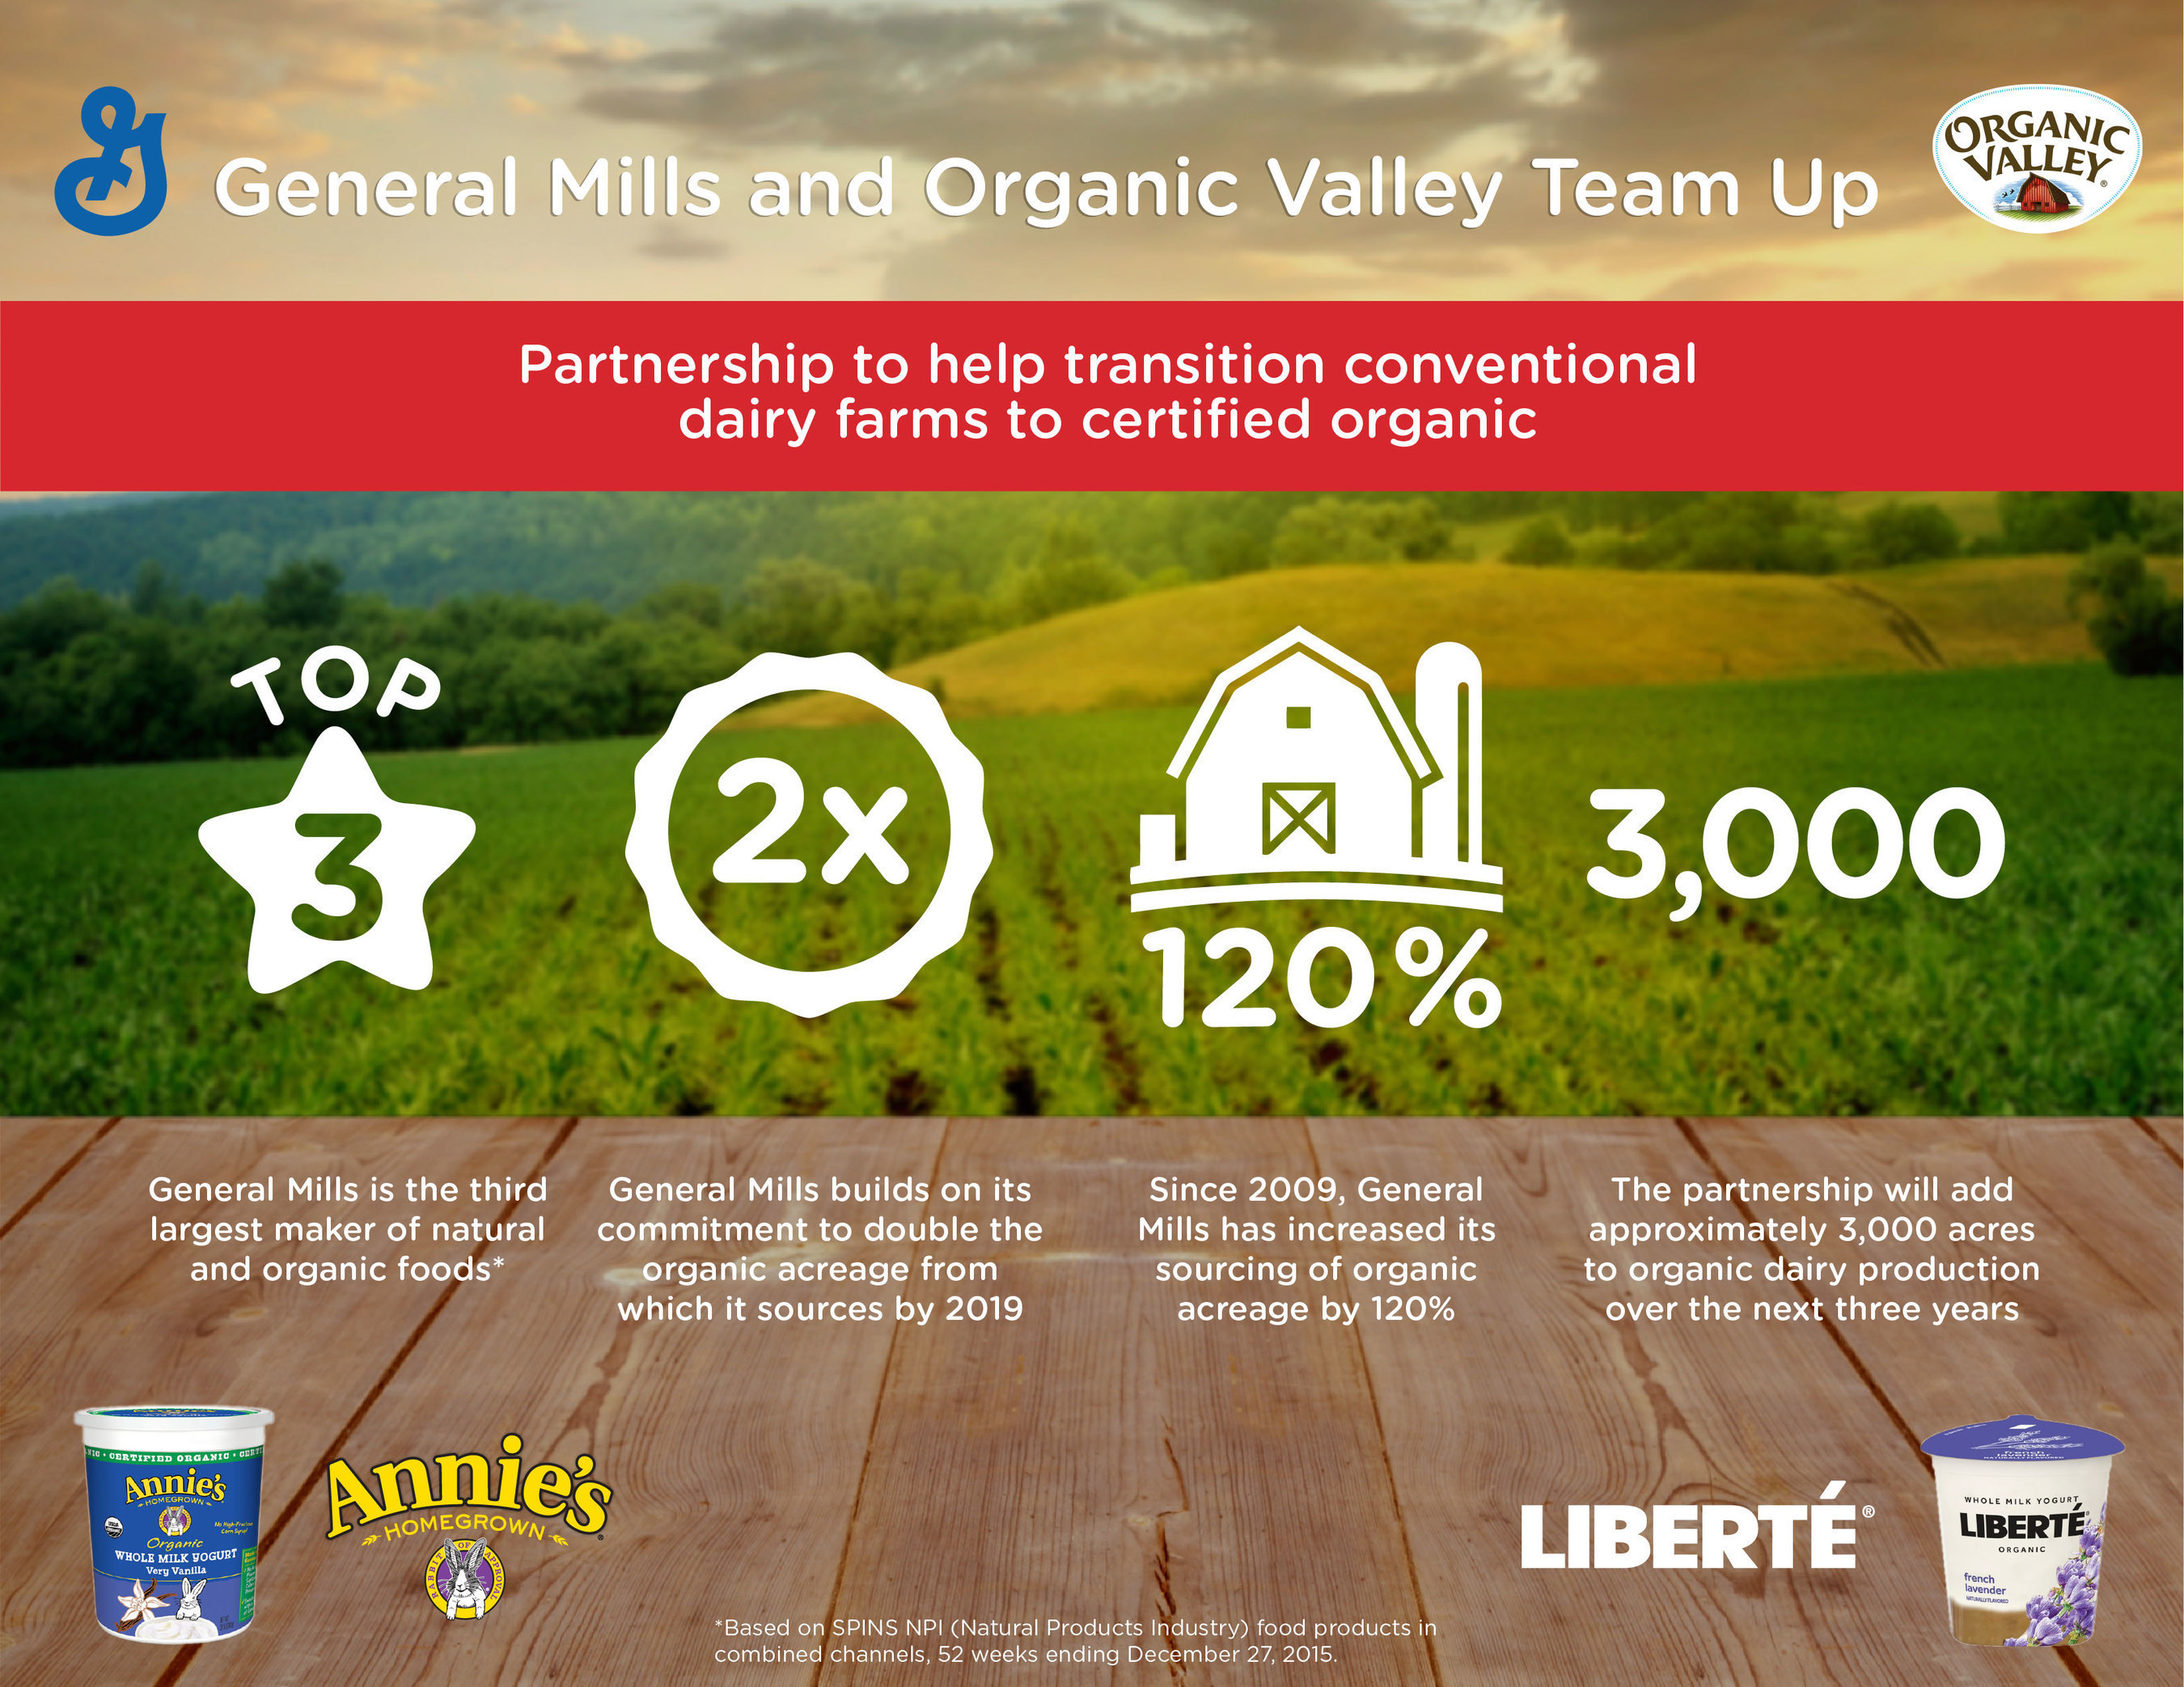 Infographic.  General Mills has announced a strategic sourcing partnership with the largest organic cooperative in the U.S. that will help about 20 dairy farms add around 3,000 acres to organic dairy production over the next three years.